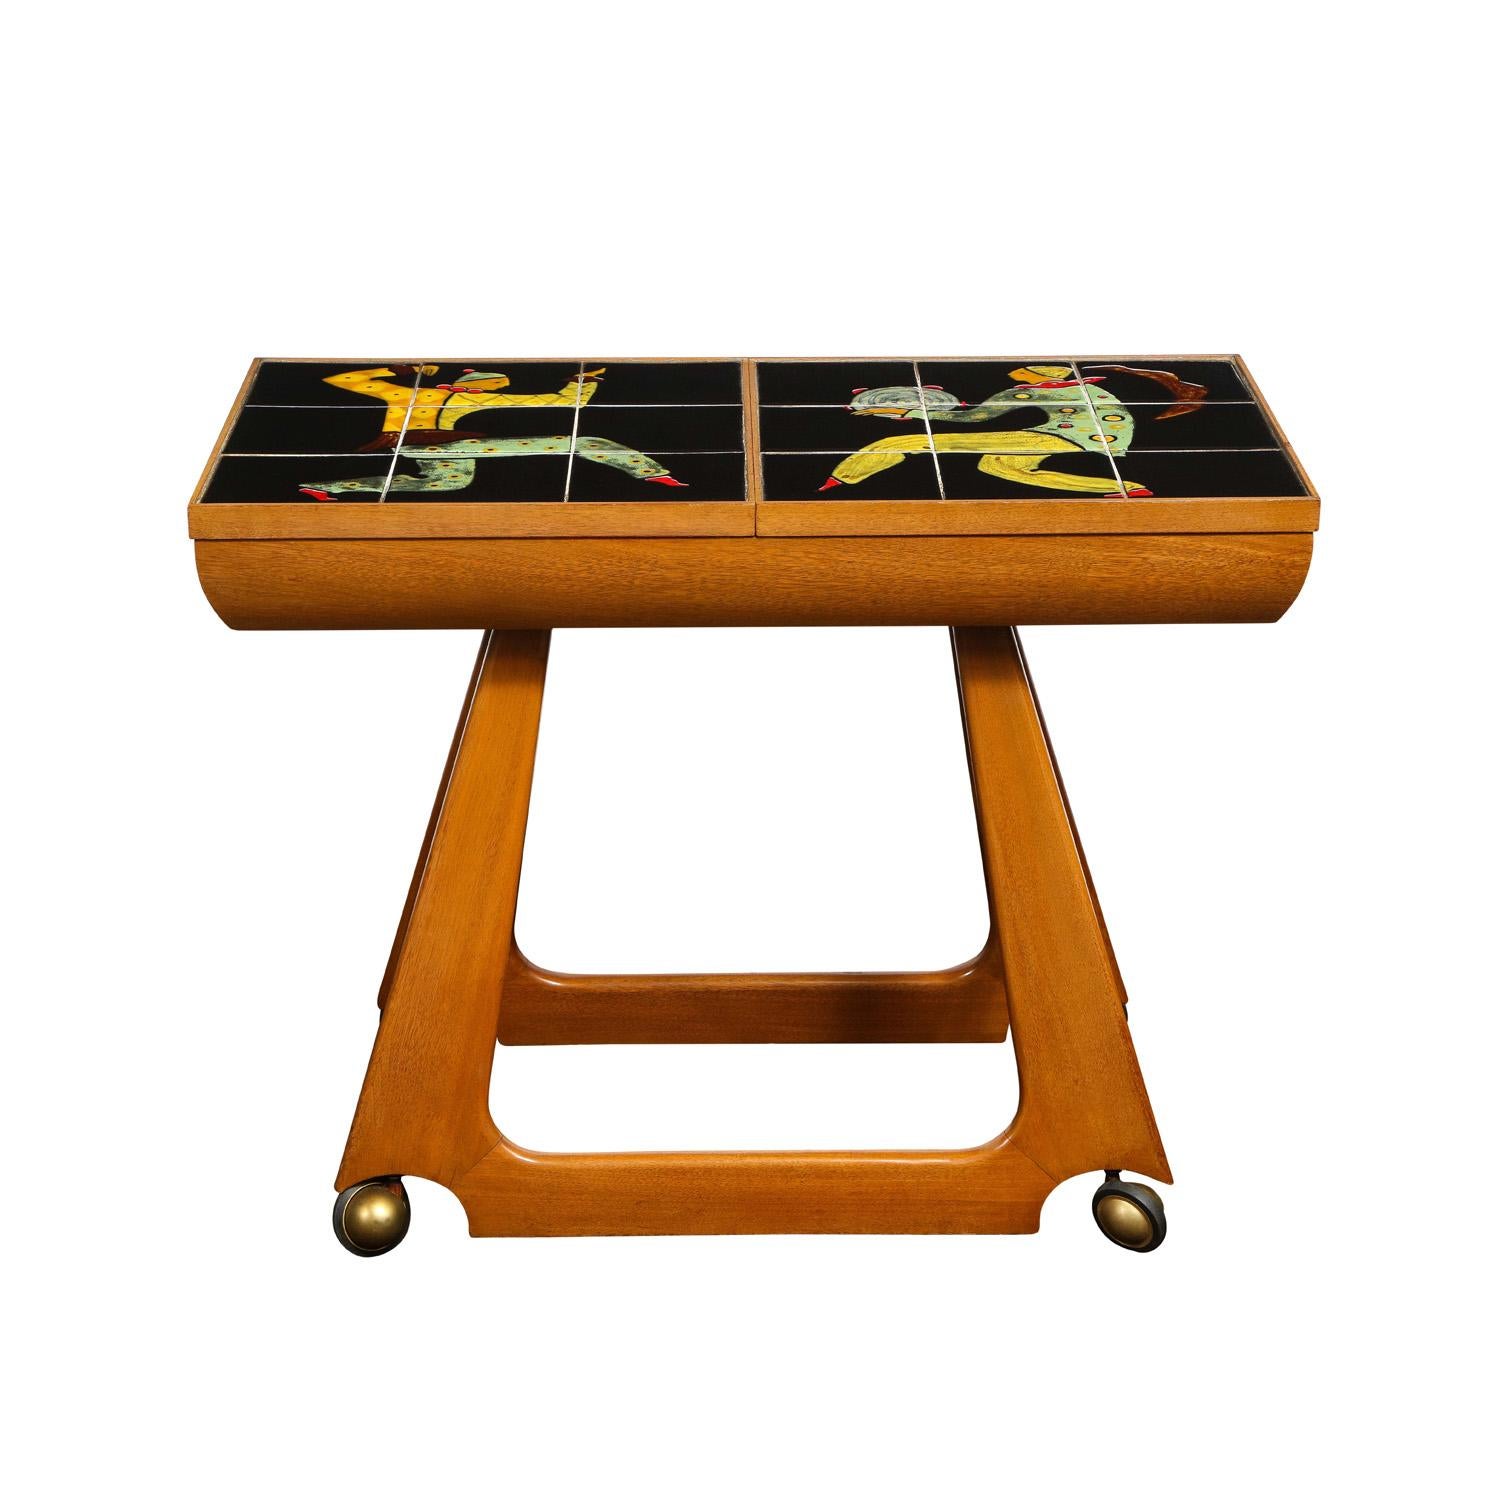 Rare and important serving cart on castors in walnut with retractable top incorporating inset hand-thrown ceramic tiles showing posed dancers by Alexandra Kasuba for Vladimir Kagan, American 1950. Kasuba did unique hand-thrown tiles with exuberant